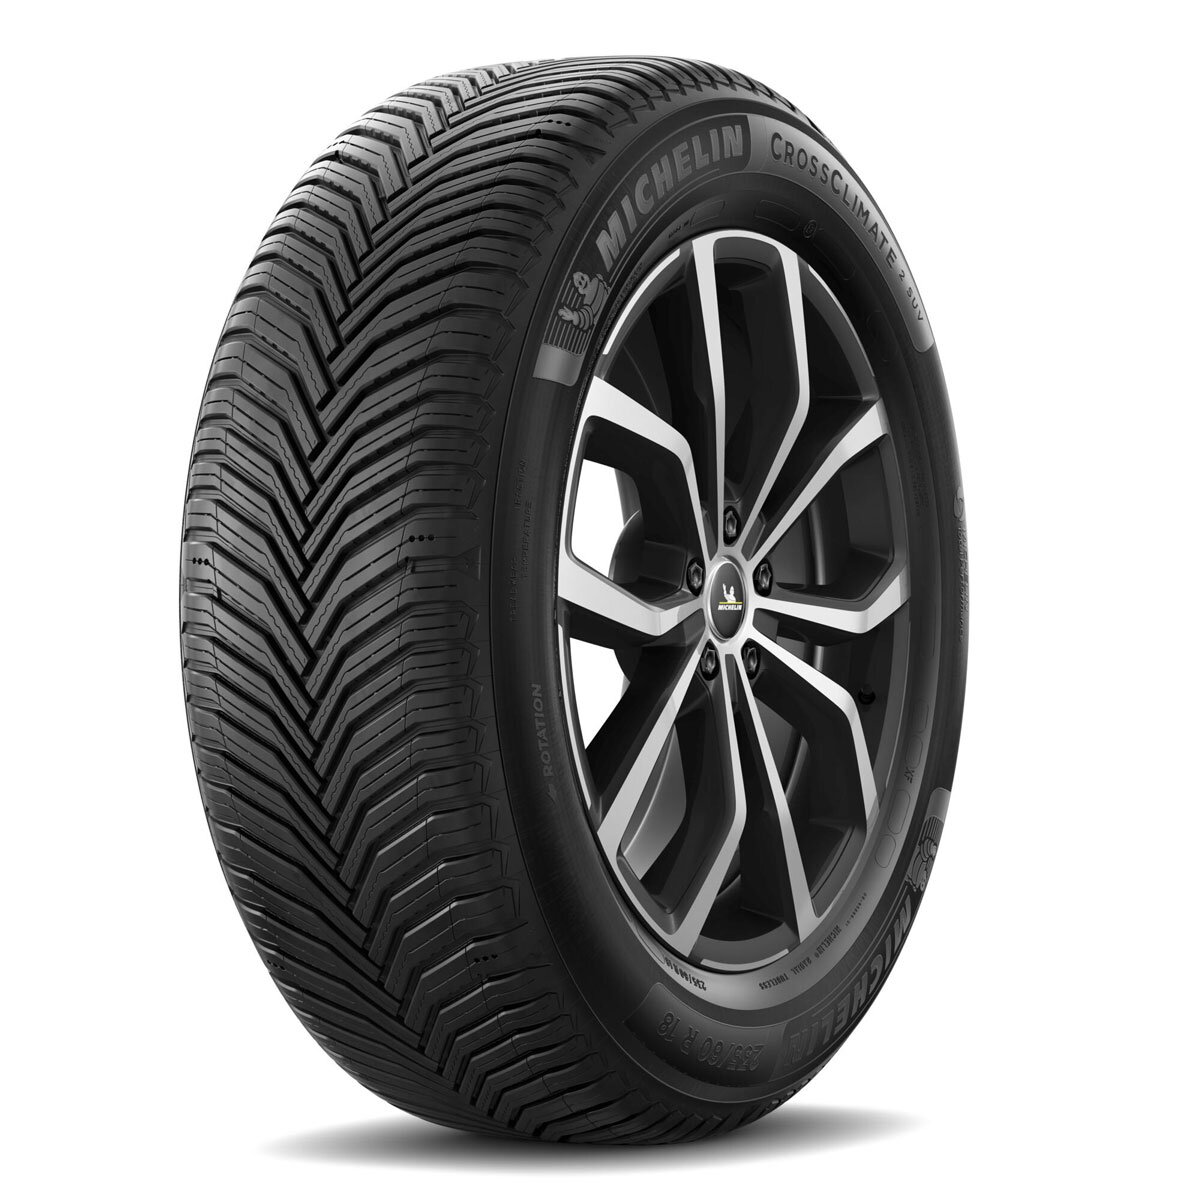 [1] Michelin CrossClimate2 P225/55R19 225 55 19 Tire - Driven Once